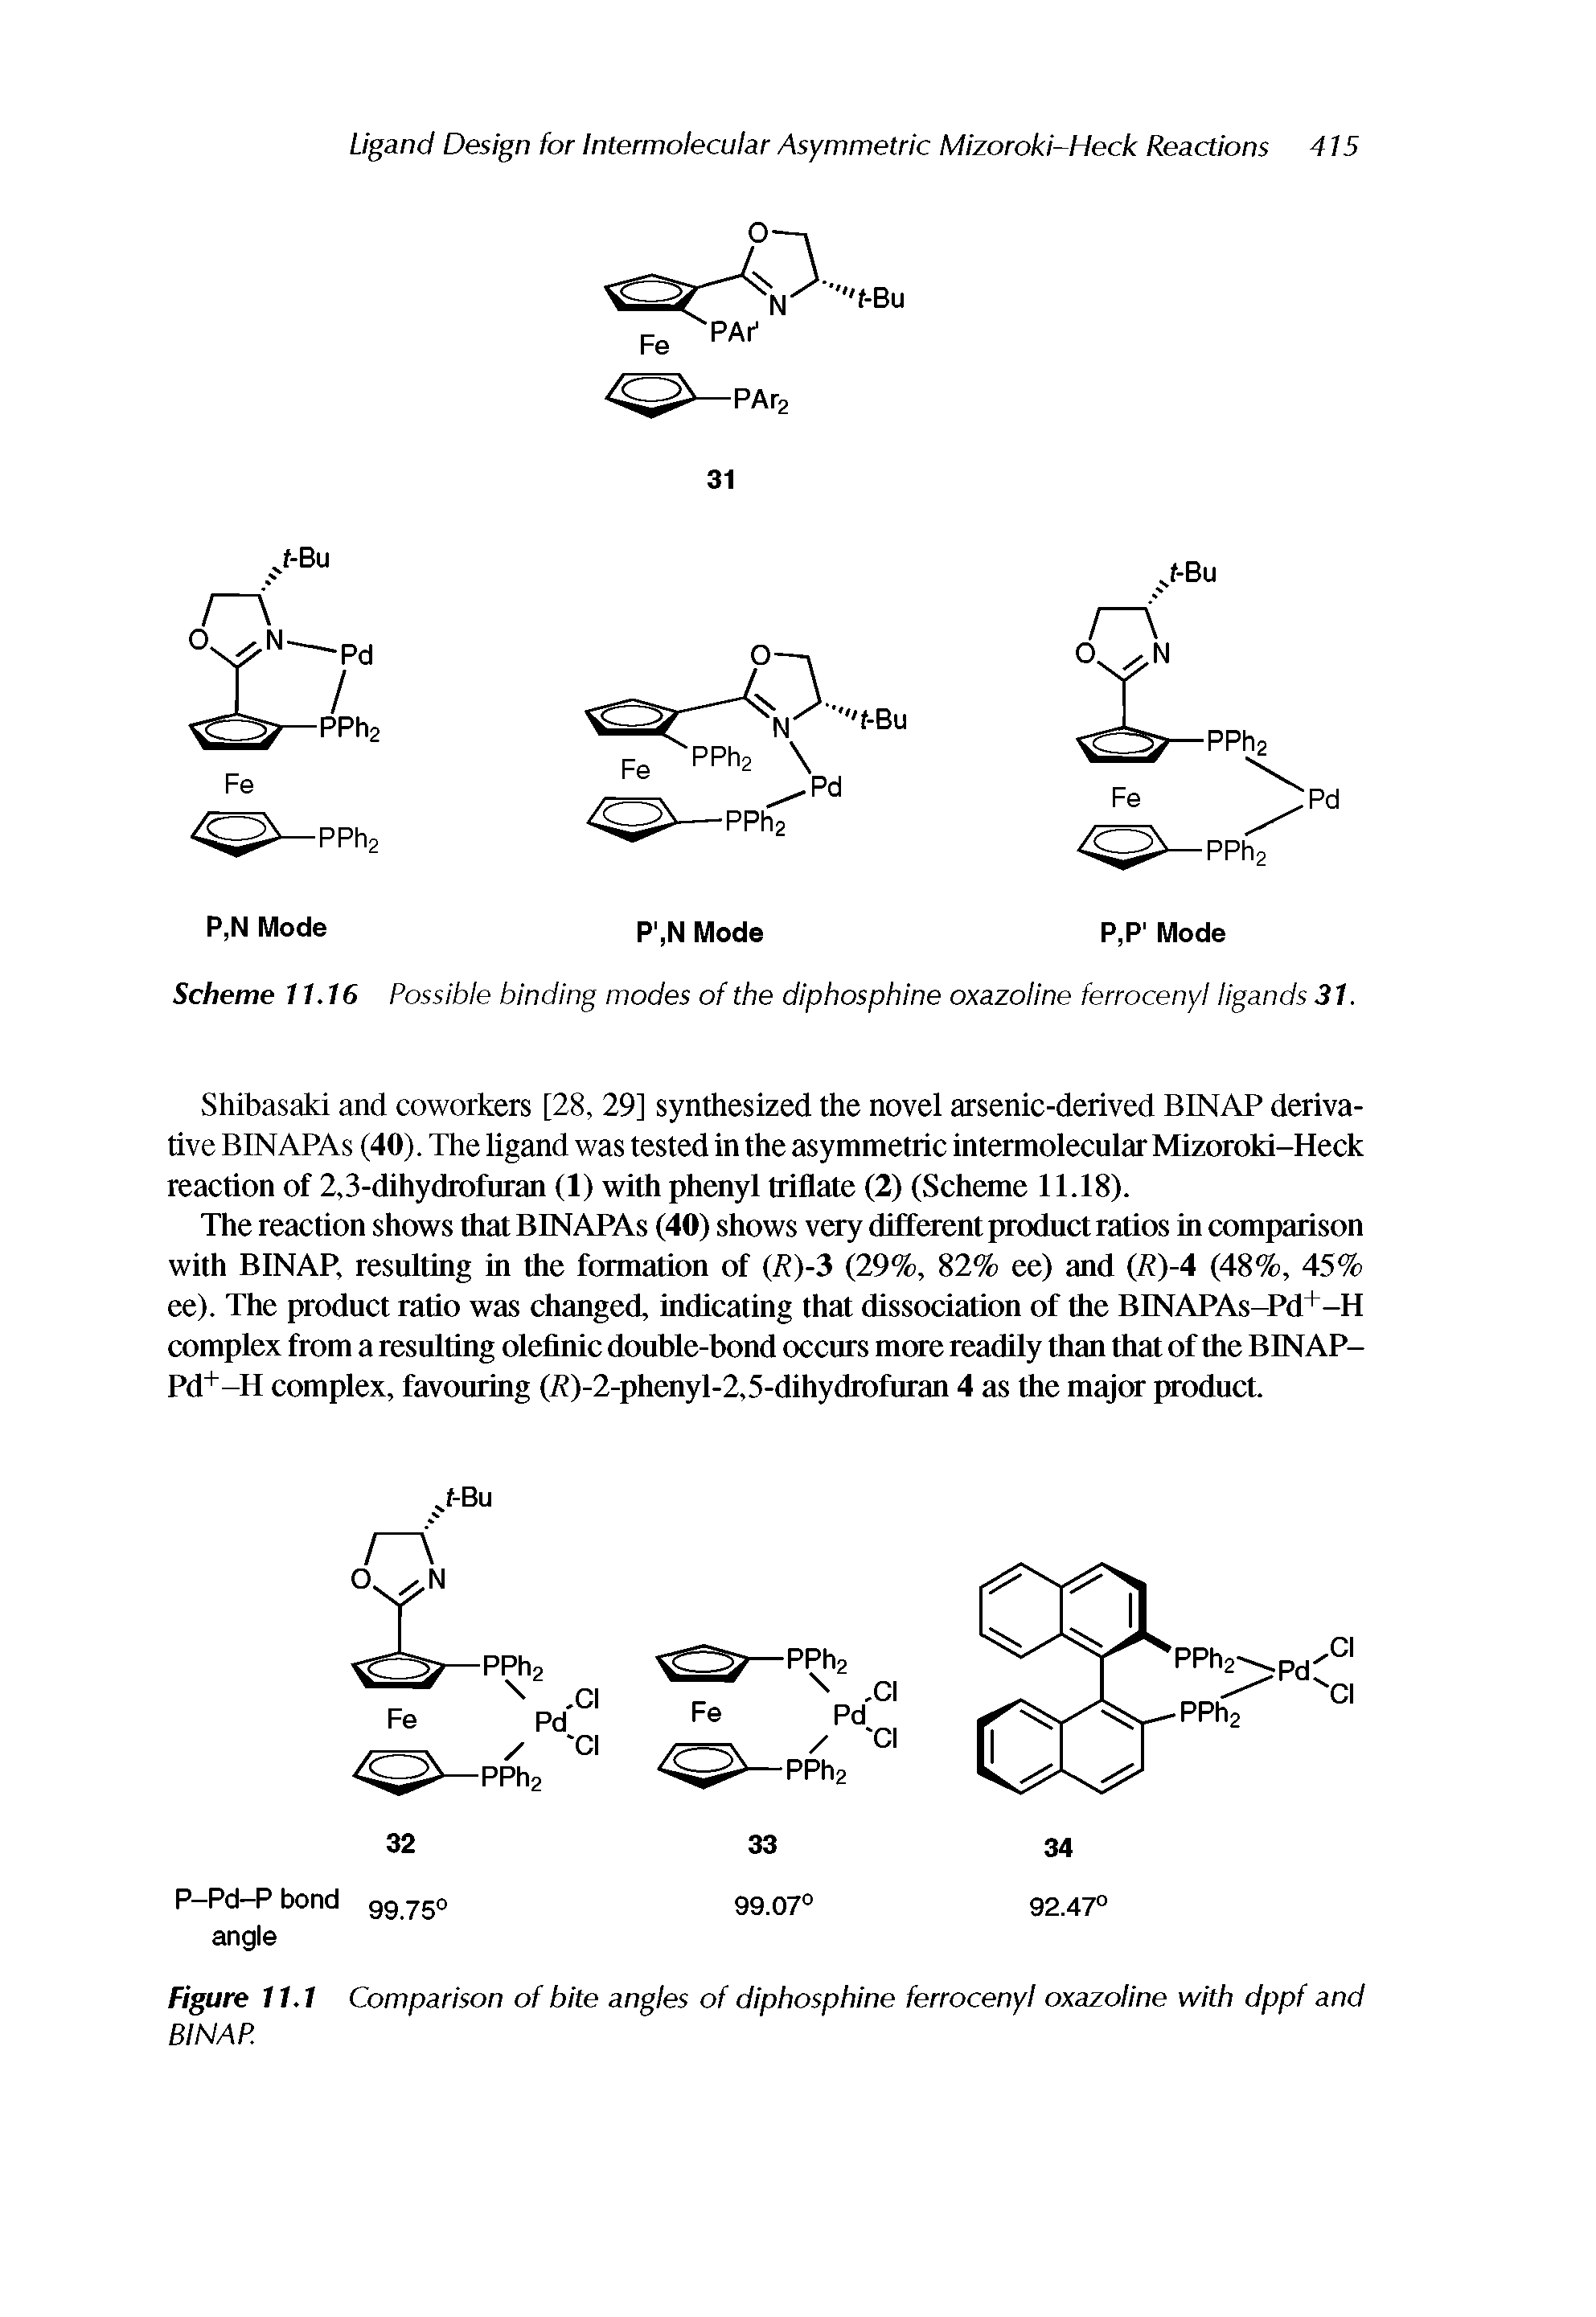 Figure 11.1 Comparison of bite angles of diphosphine ferrocenyl oxazoline with dppf and BINAP.